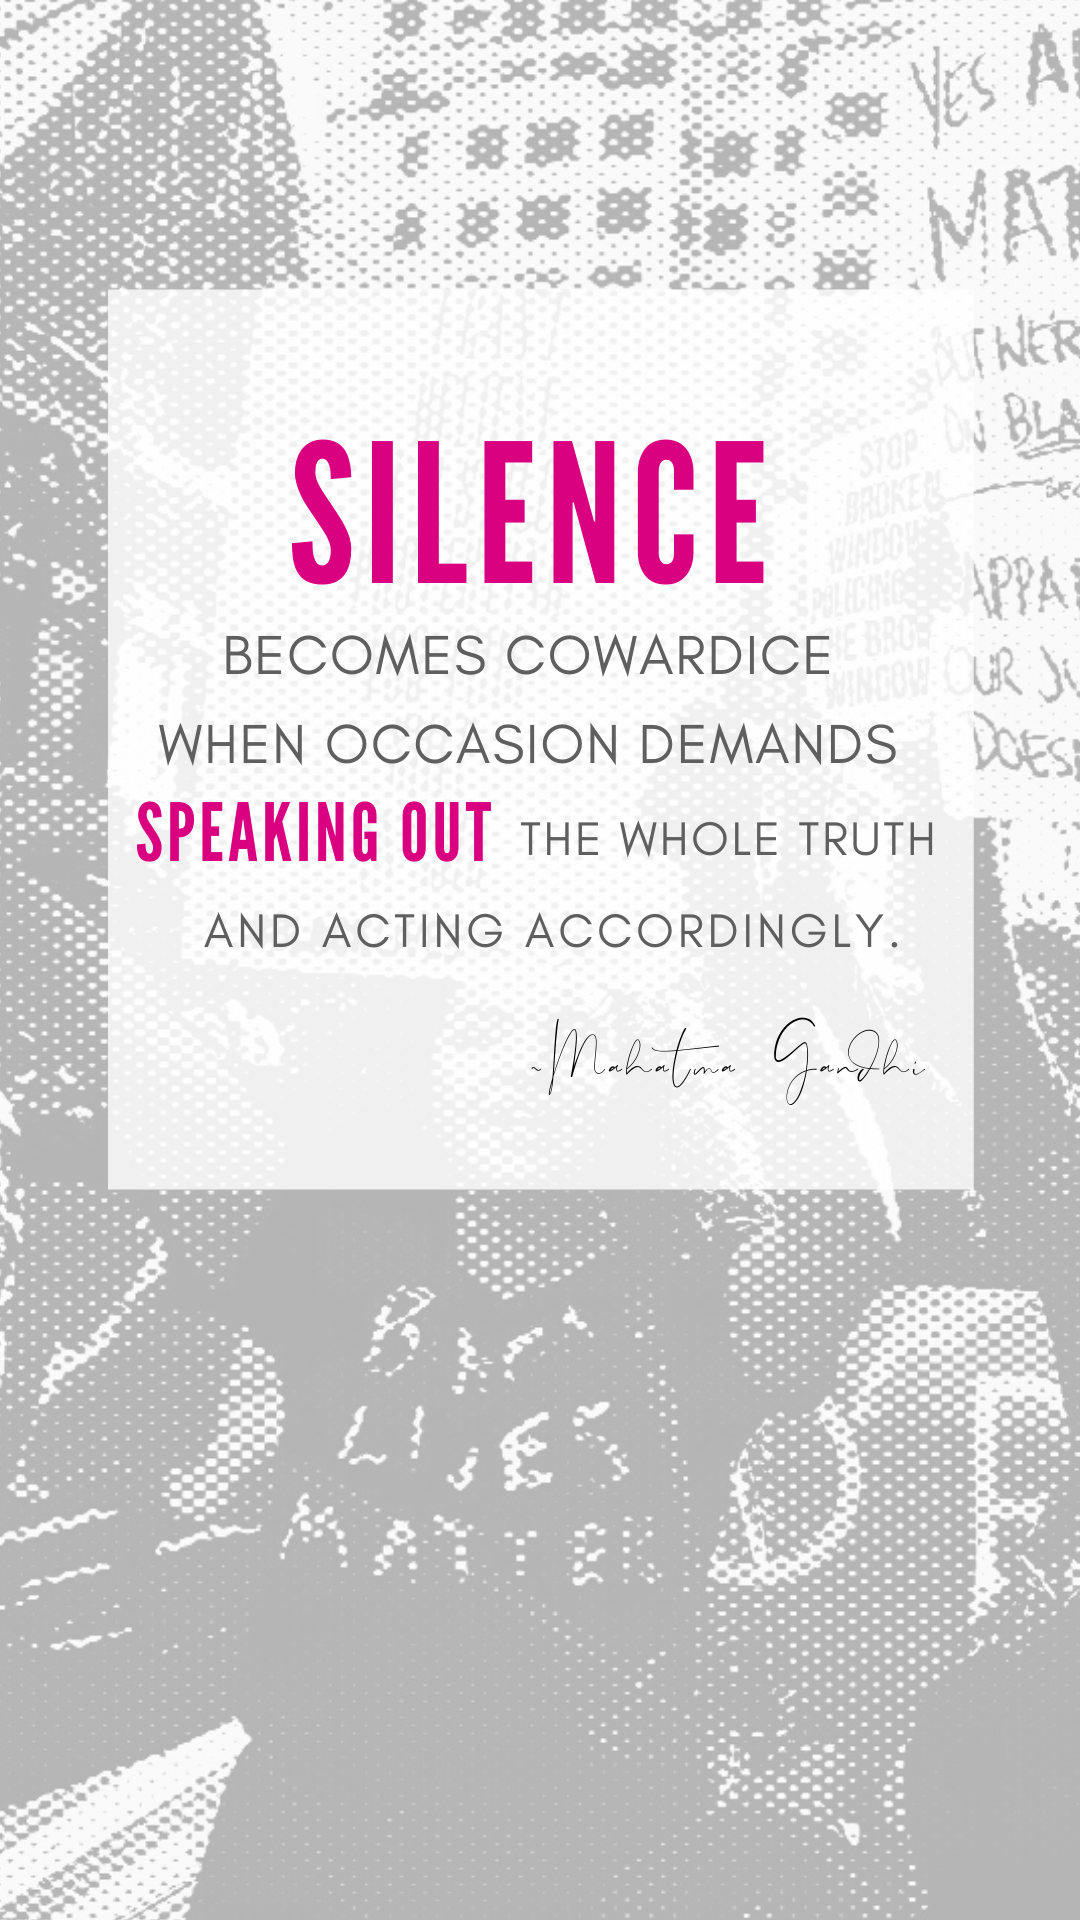 quote by Mahatma Gandhi about speaking up against oppression and racism